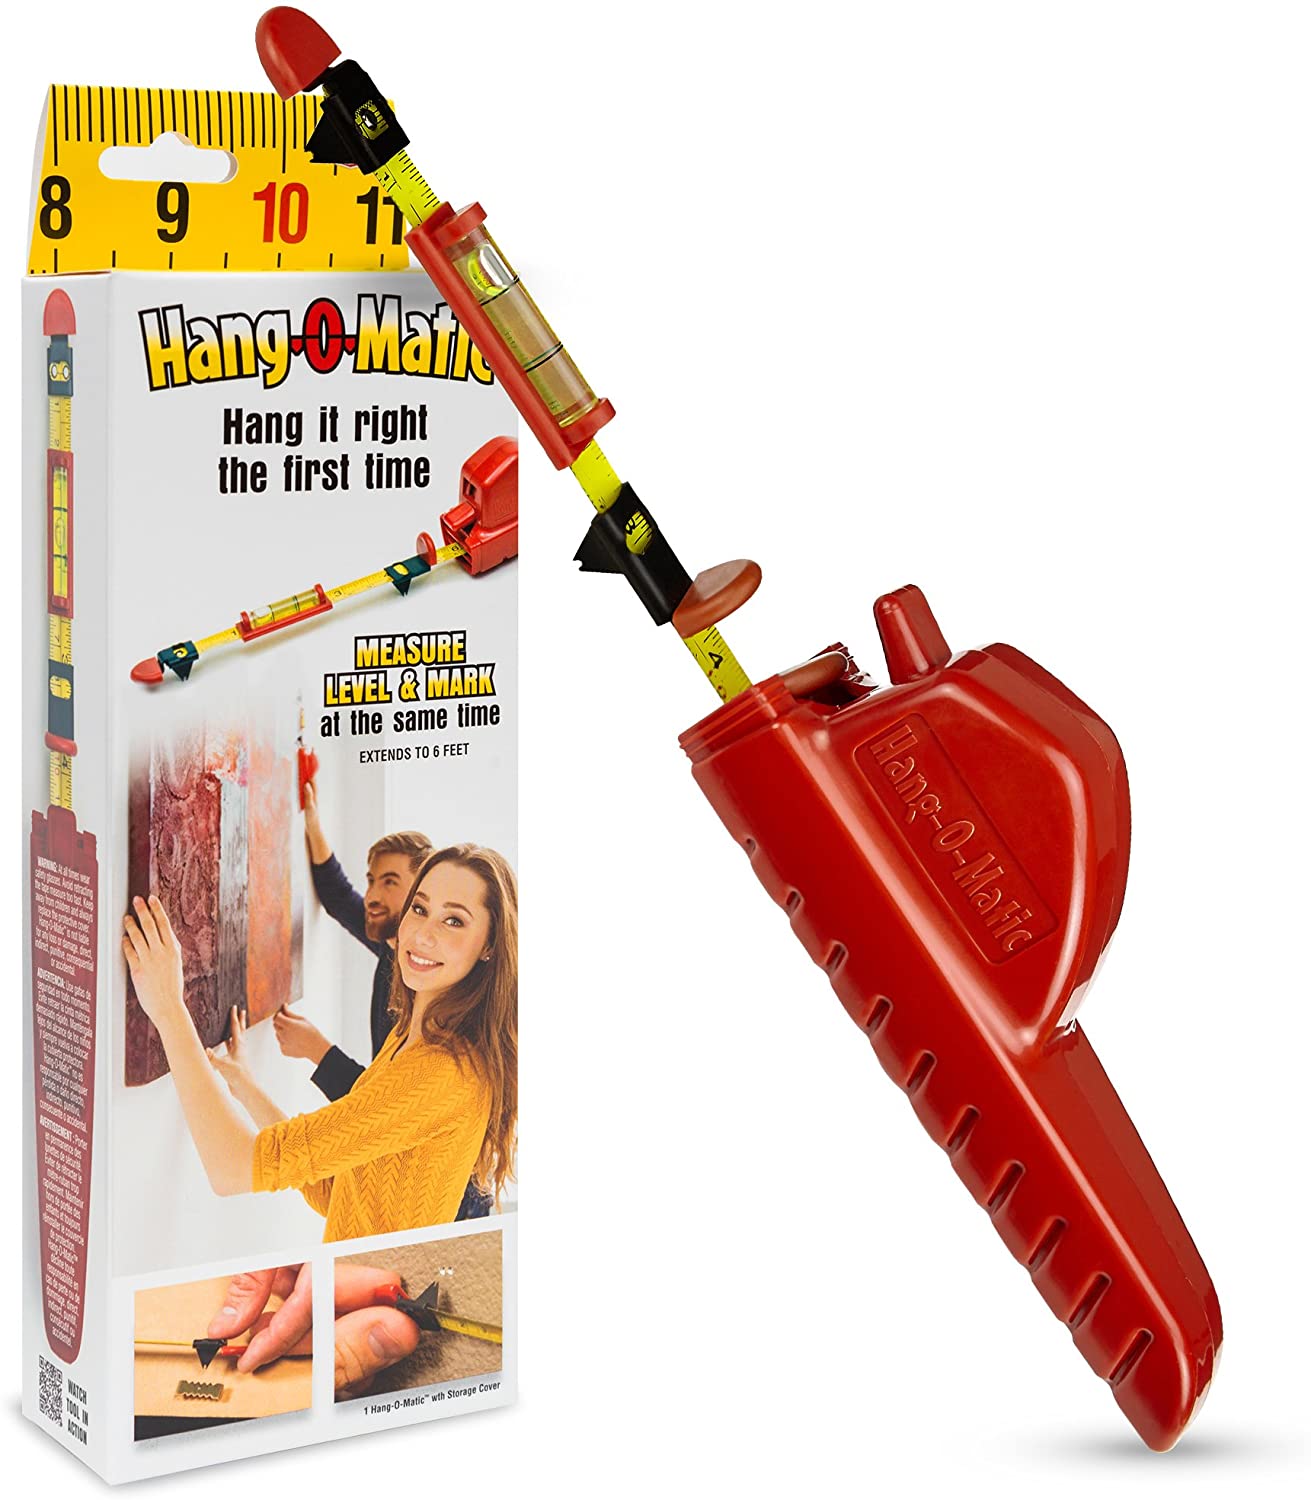 Hang-O-Matic Compact Sliding Pins Picture Hanging Tool